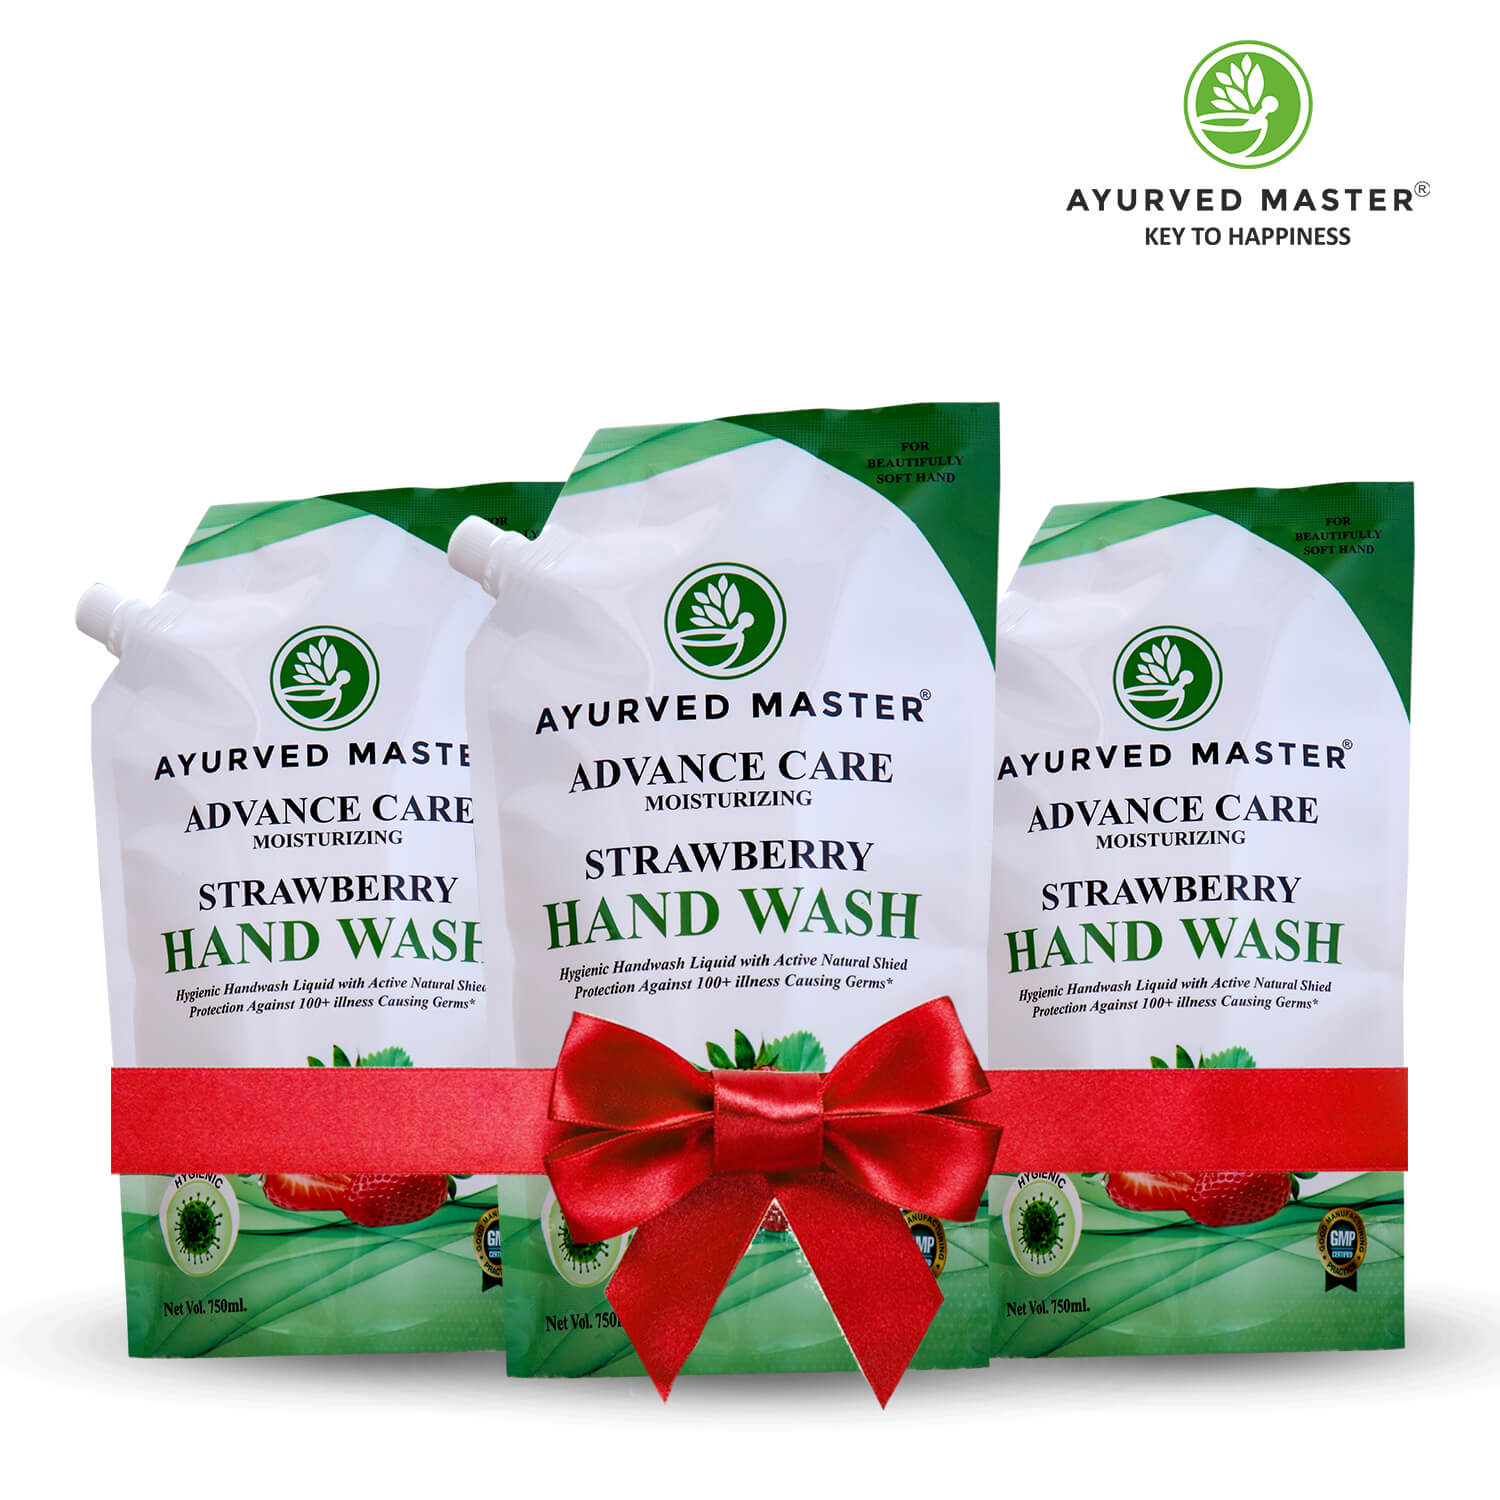 Ayurved Master Advanced Skincare Moisturizing Liquid Strwberry Hand Wash Refill Pouch, Fights 100 Illness Causing Germs | 2250ml (750ml*3)